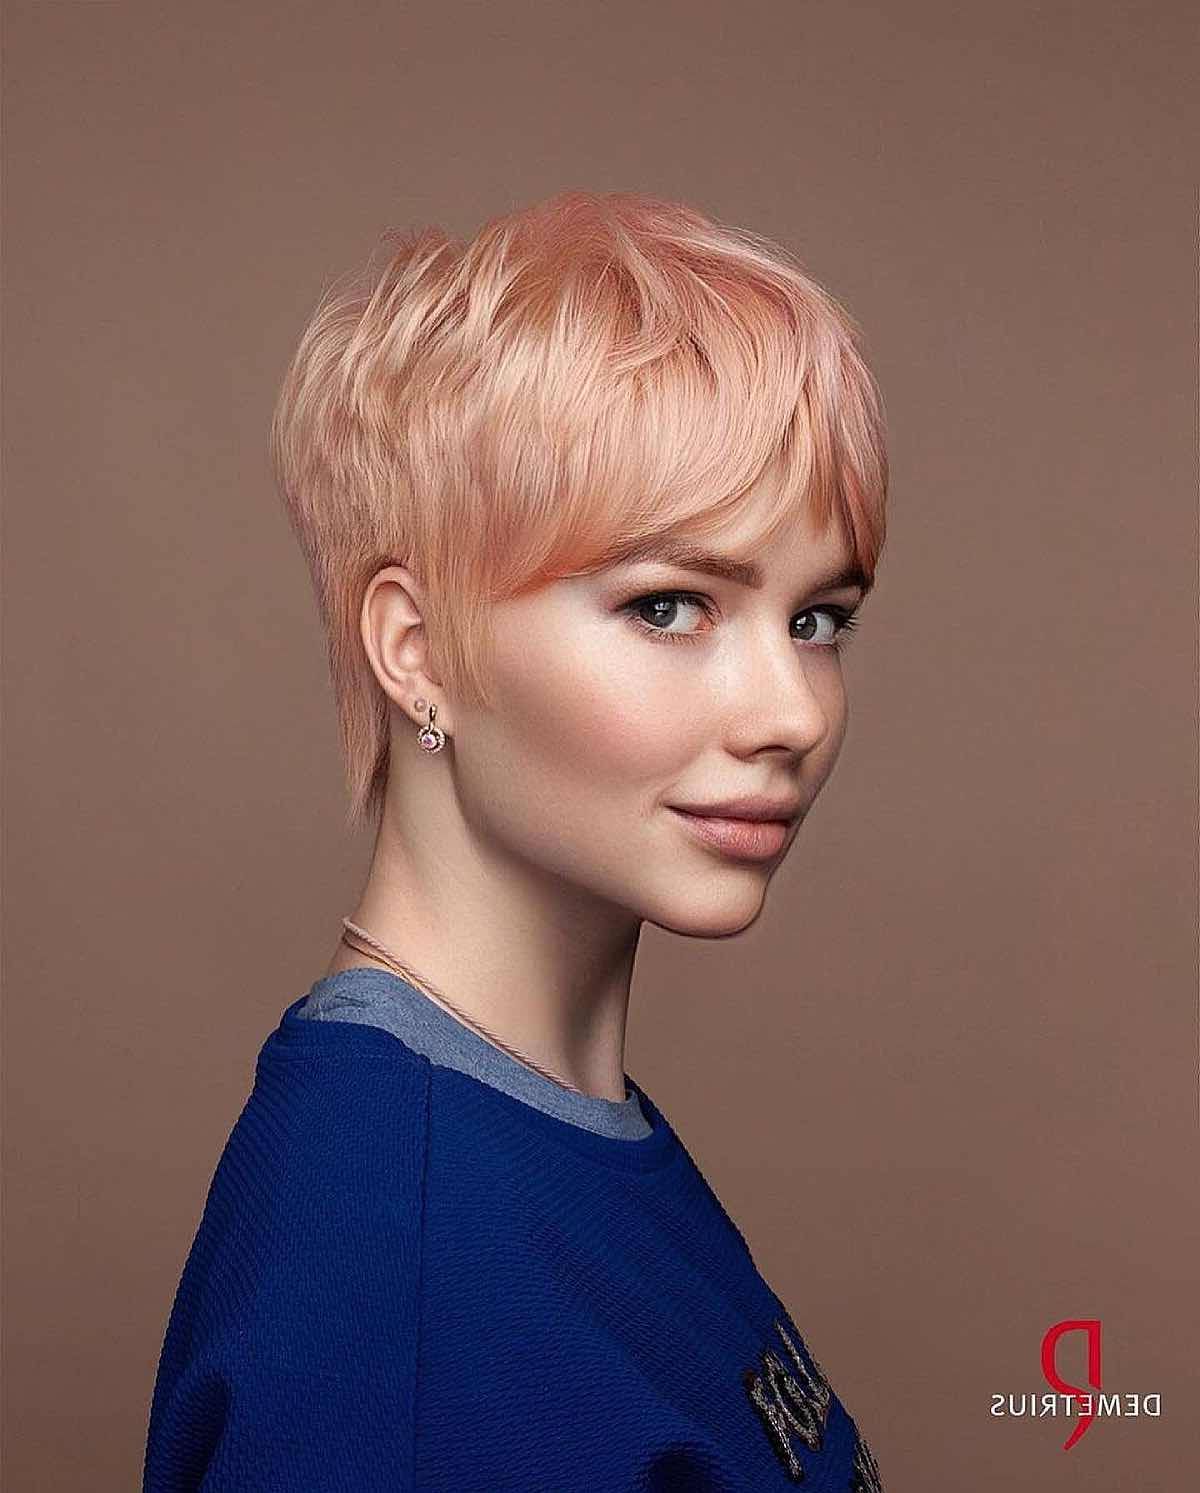 43 Cutest Pixie Cuts With Bangs For A Face Flattering Crop Regarding Bright Bang Pixie Hairstyles (View 5 of 25)